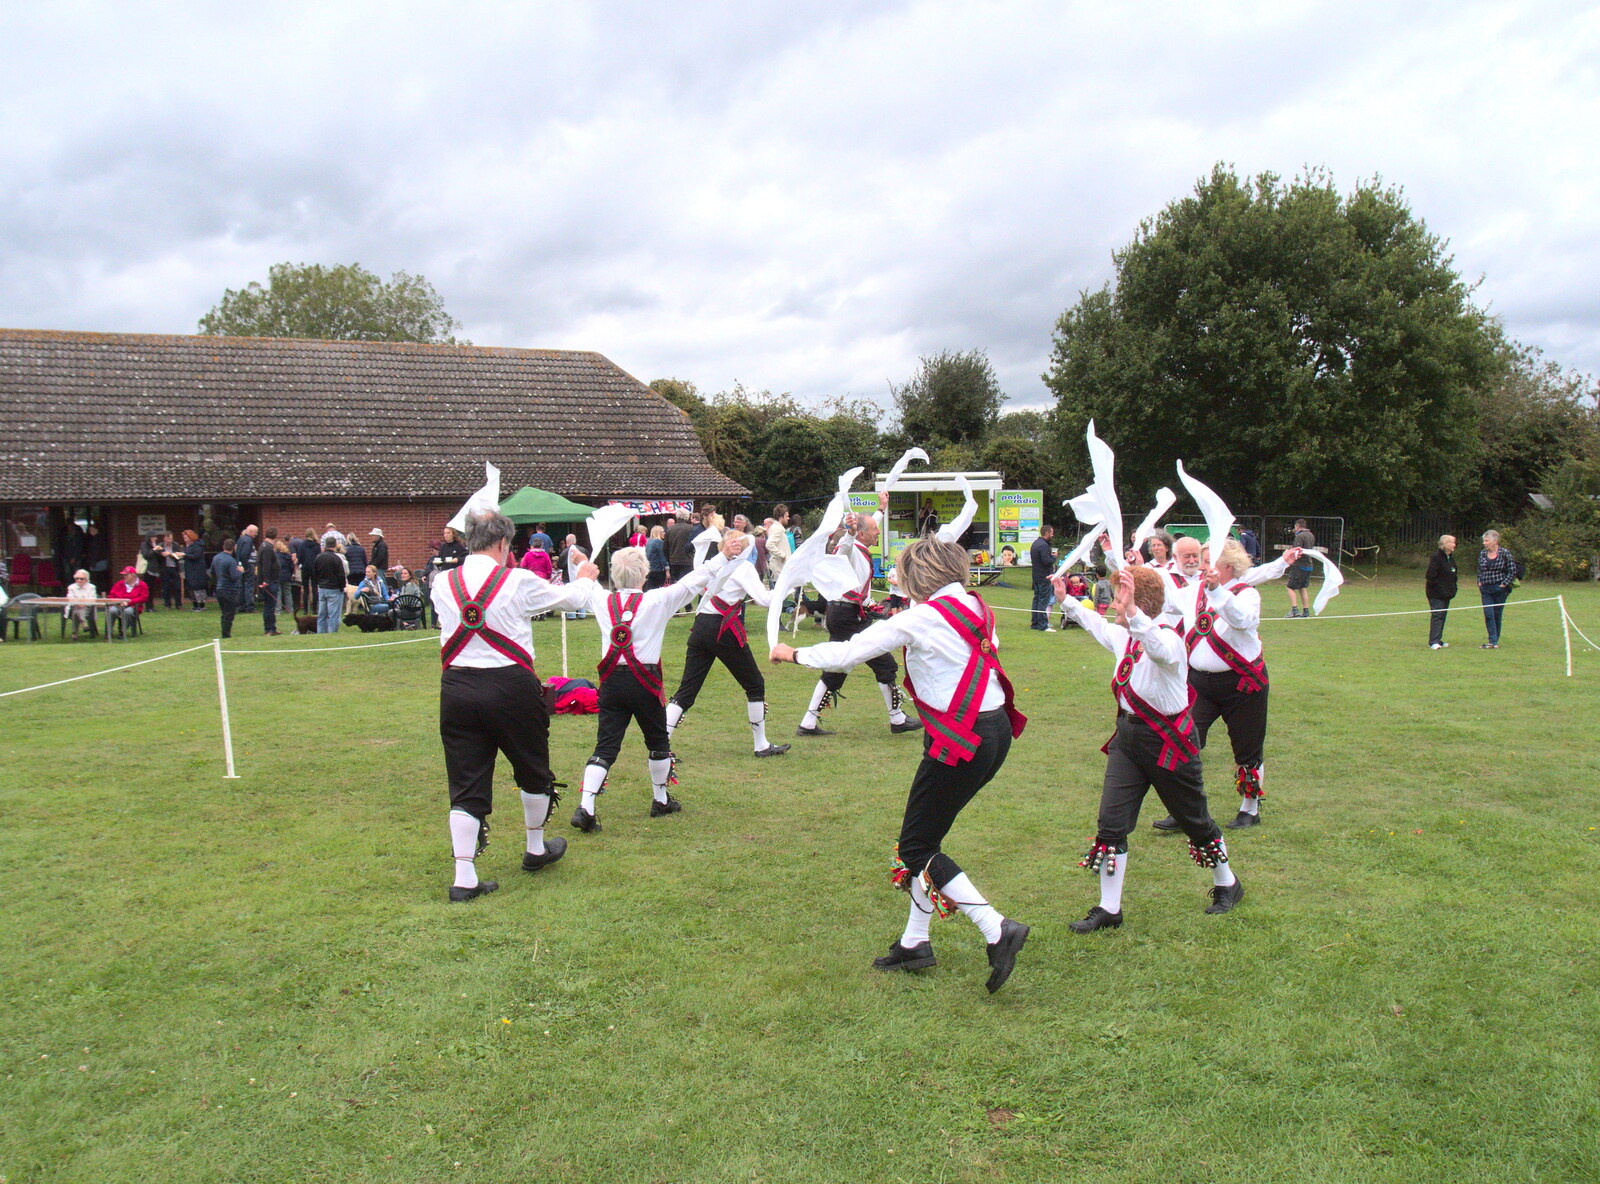 Dancing in circles with handkerchiefs from A Summer Fete, Palgrave, Suffolk - 10th September 2017